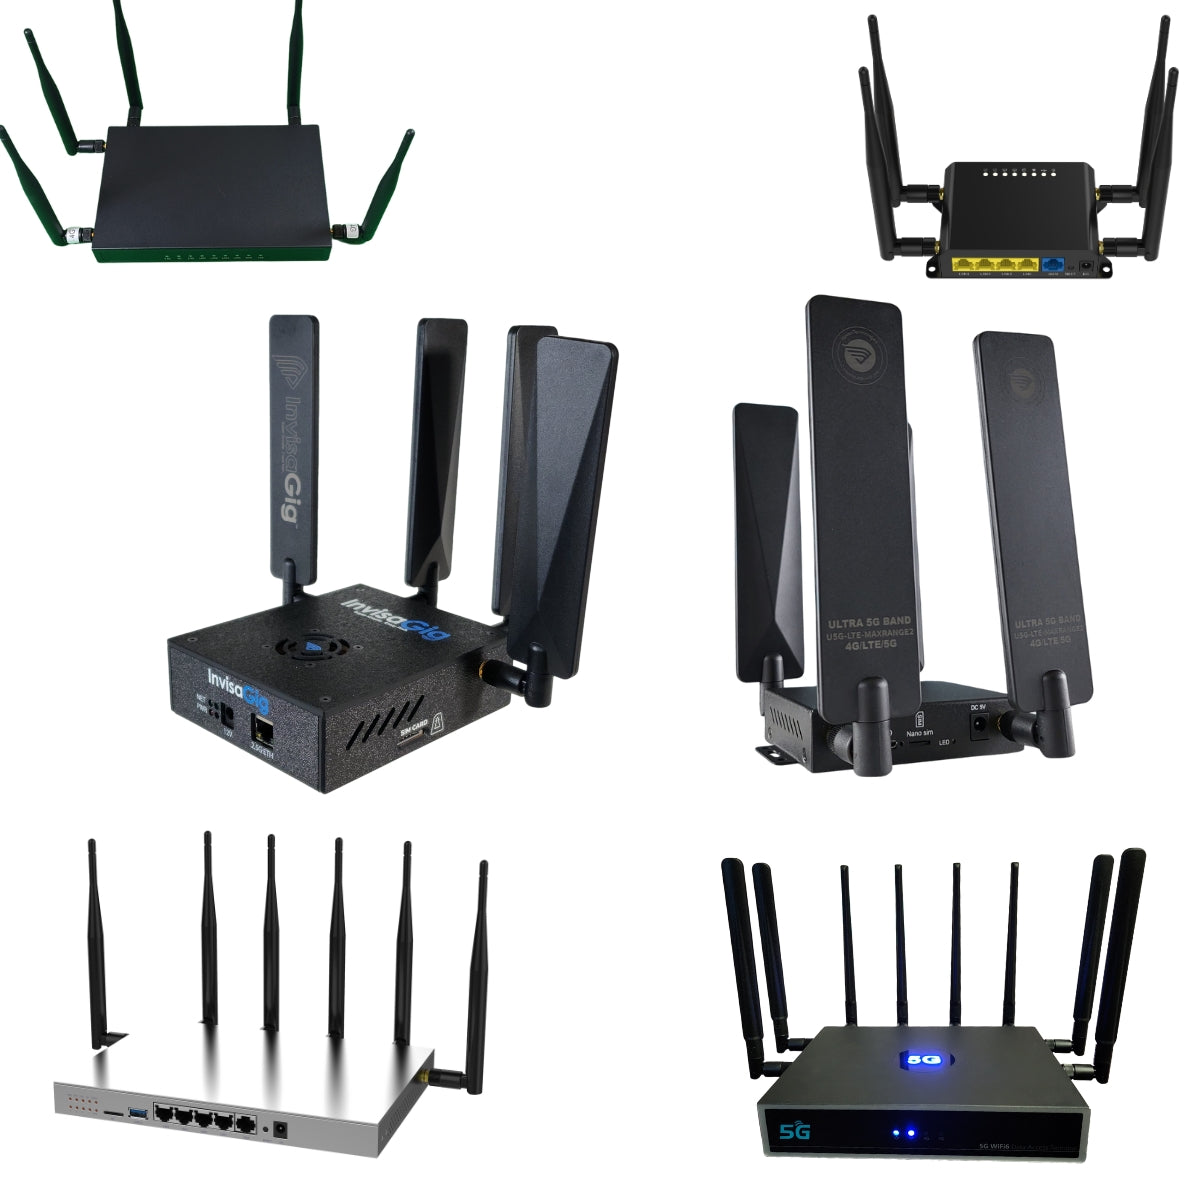 Cellular and WiFi Internet Systems